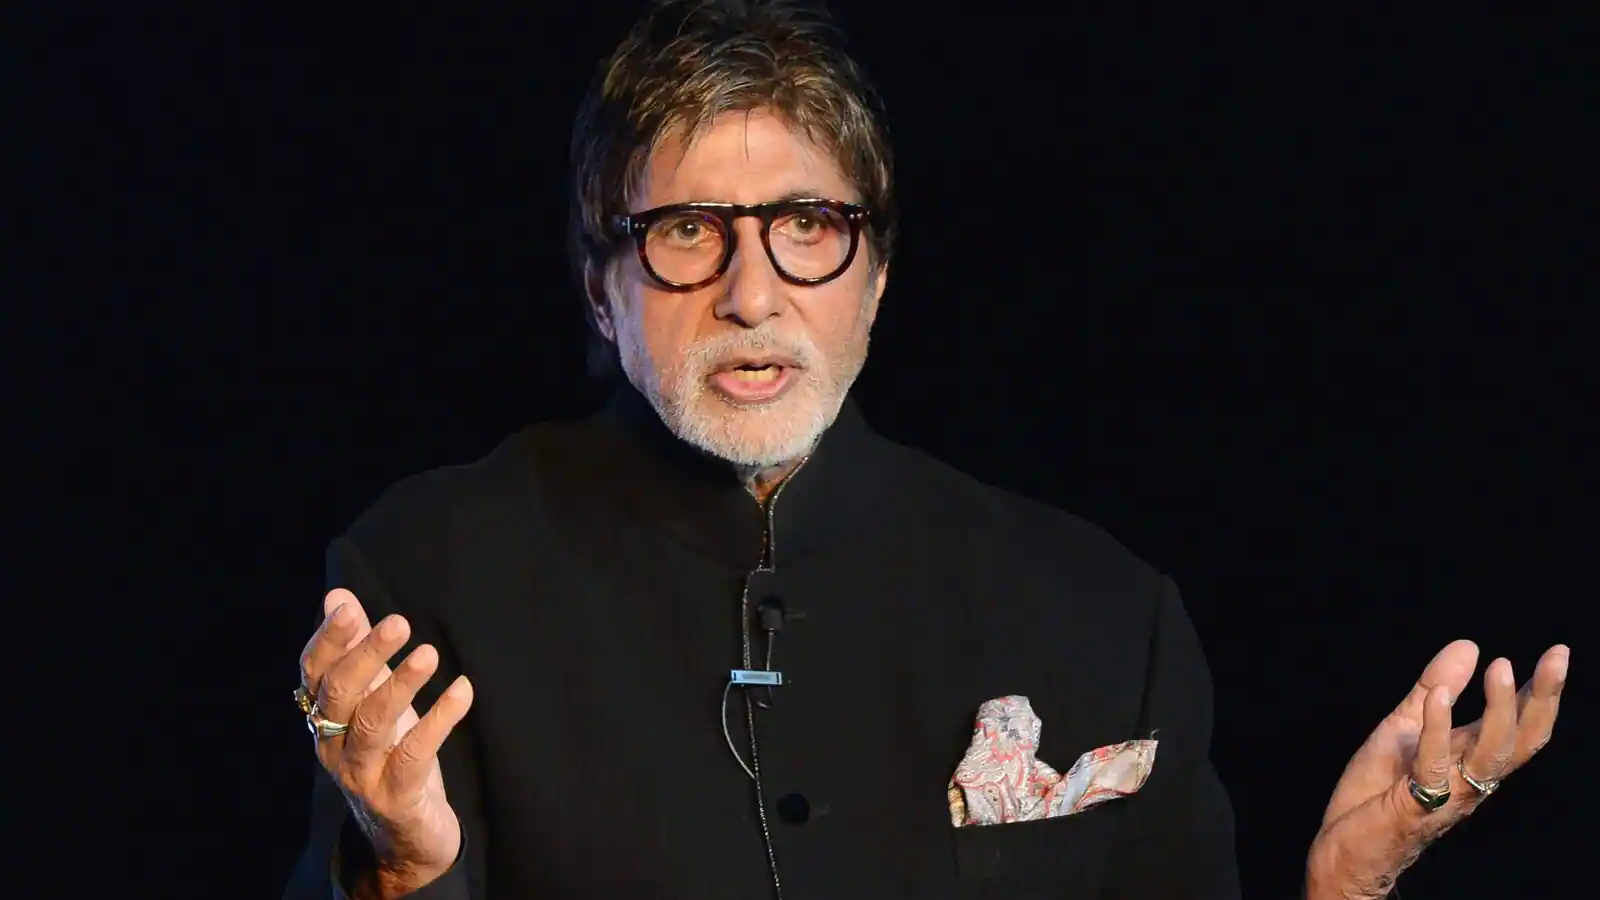 Bollywood superstar Amitabh Bachchan suffered an injury while filming